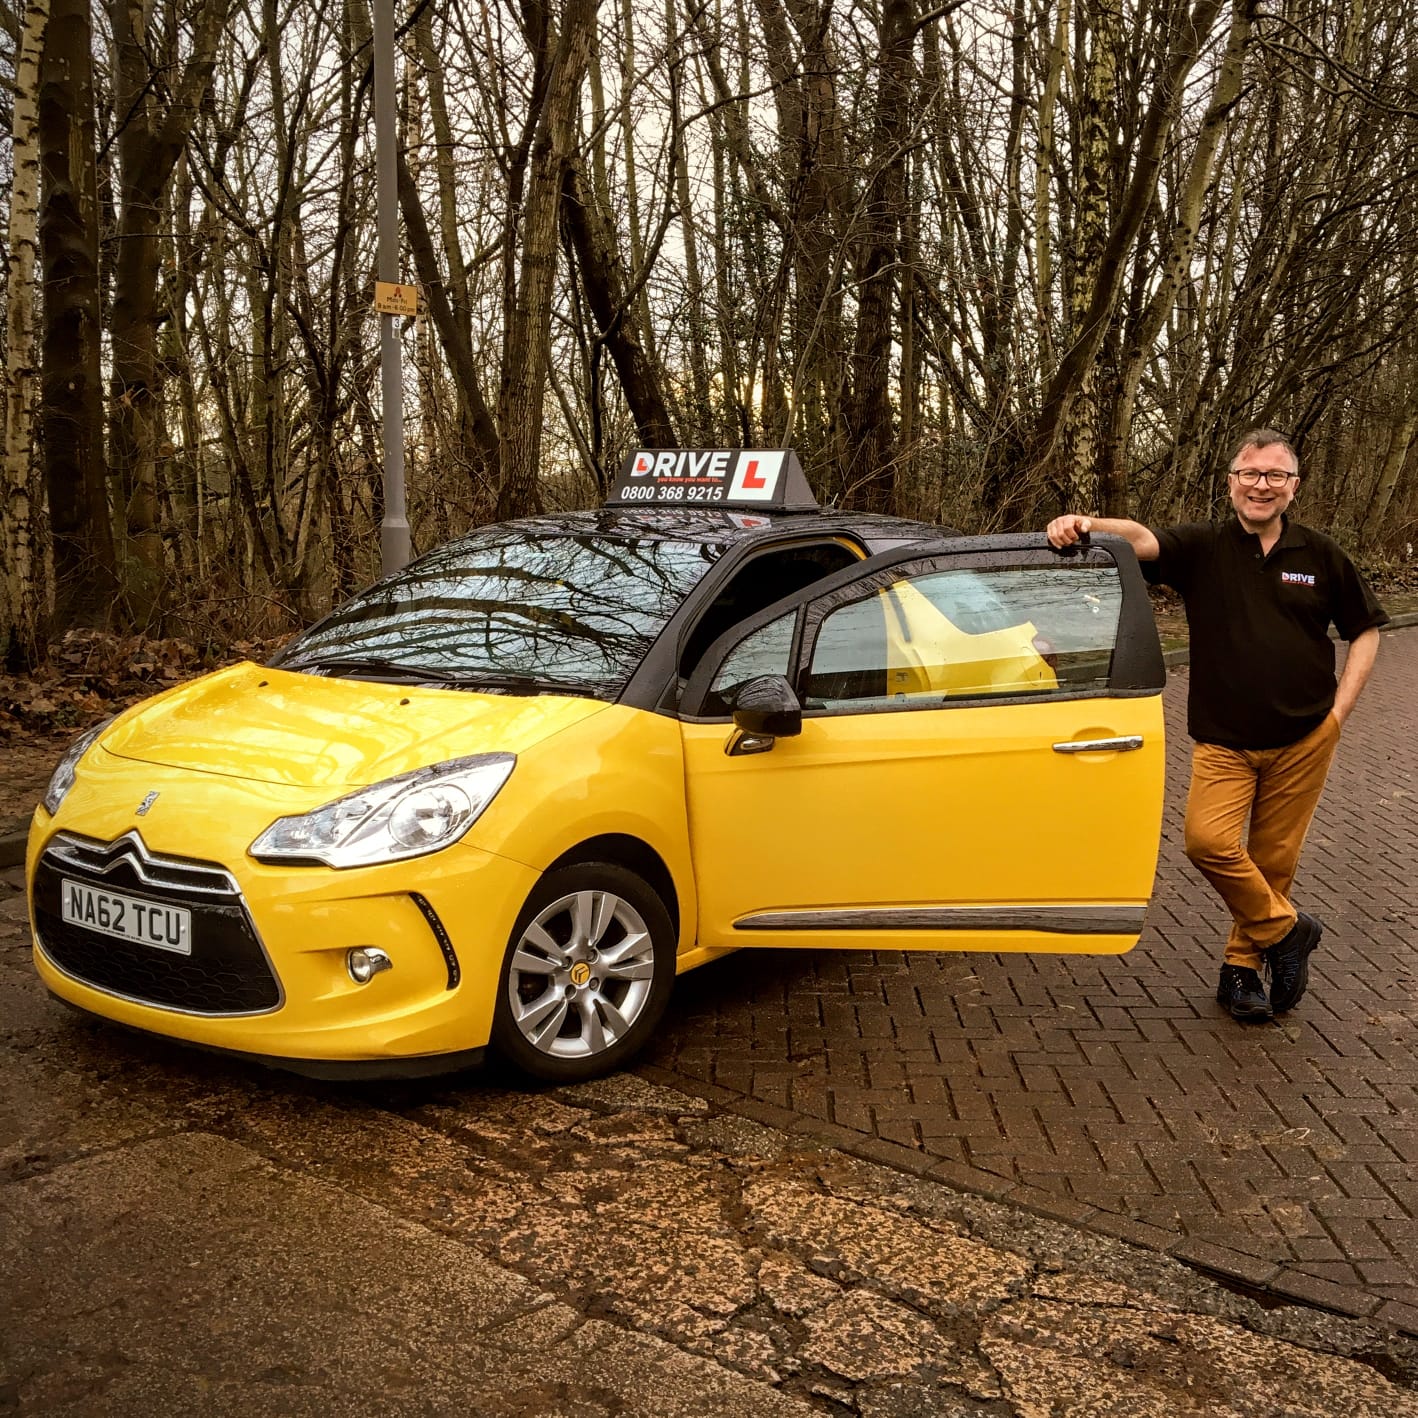 Bury automatic driving instructor